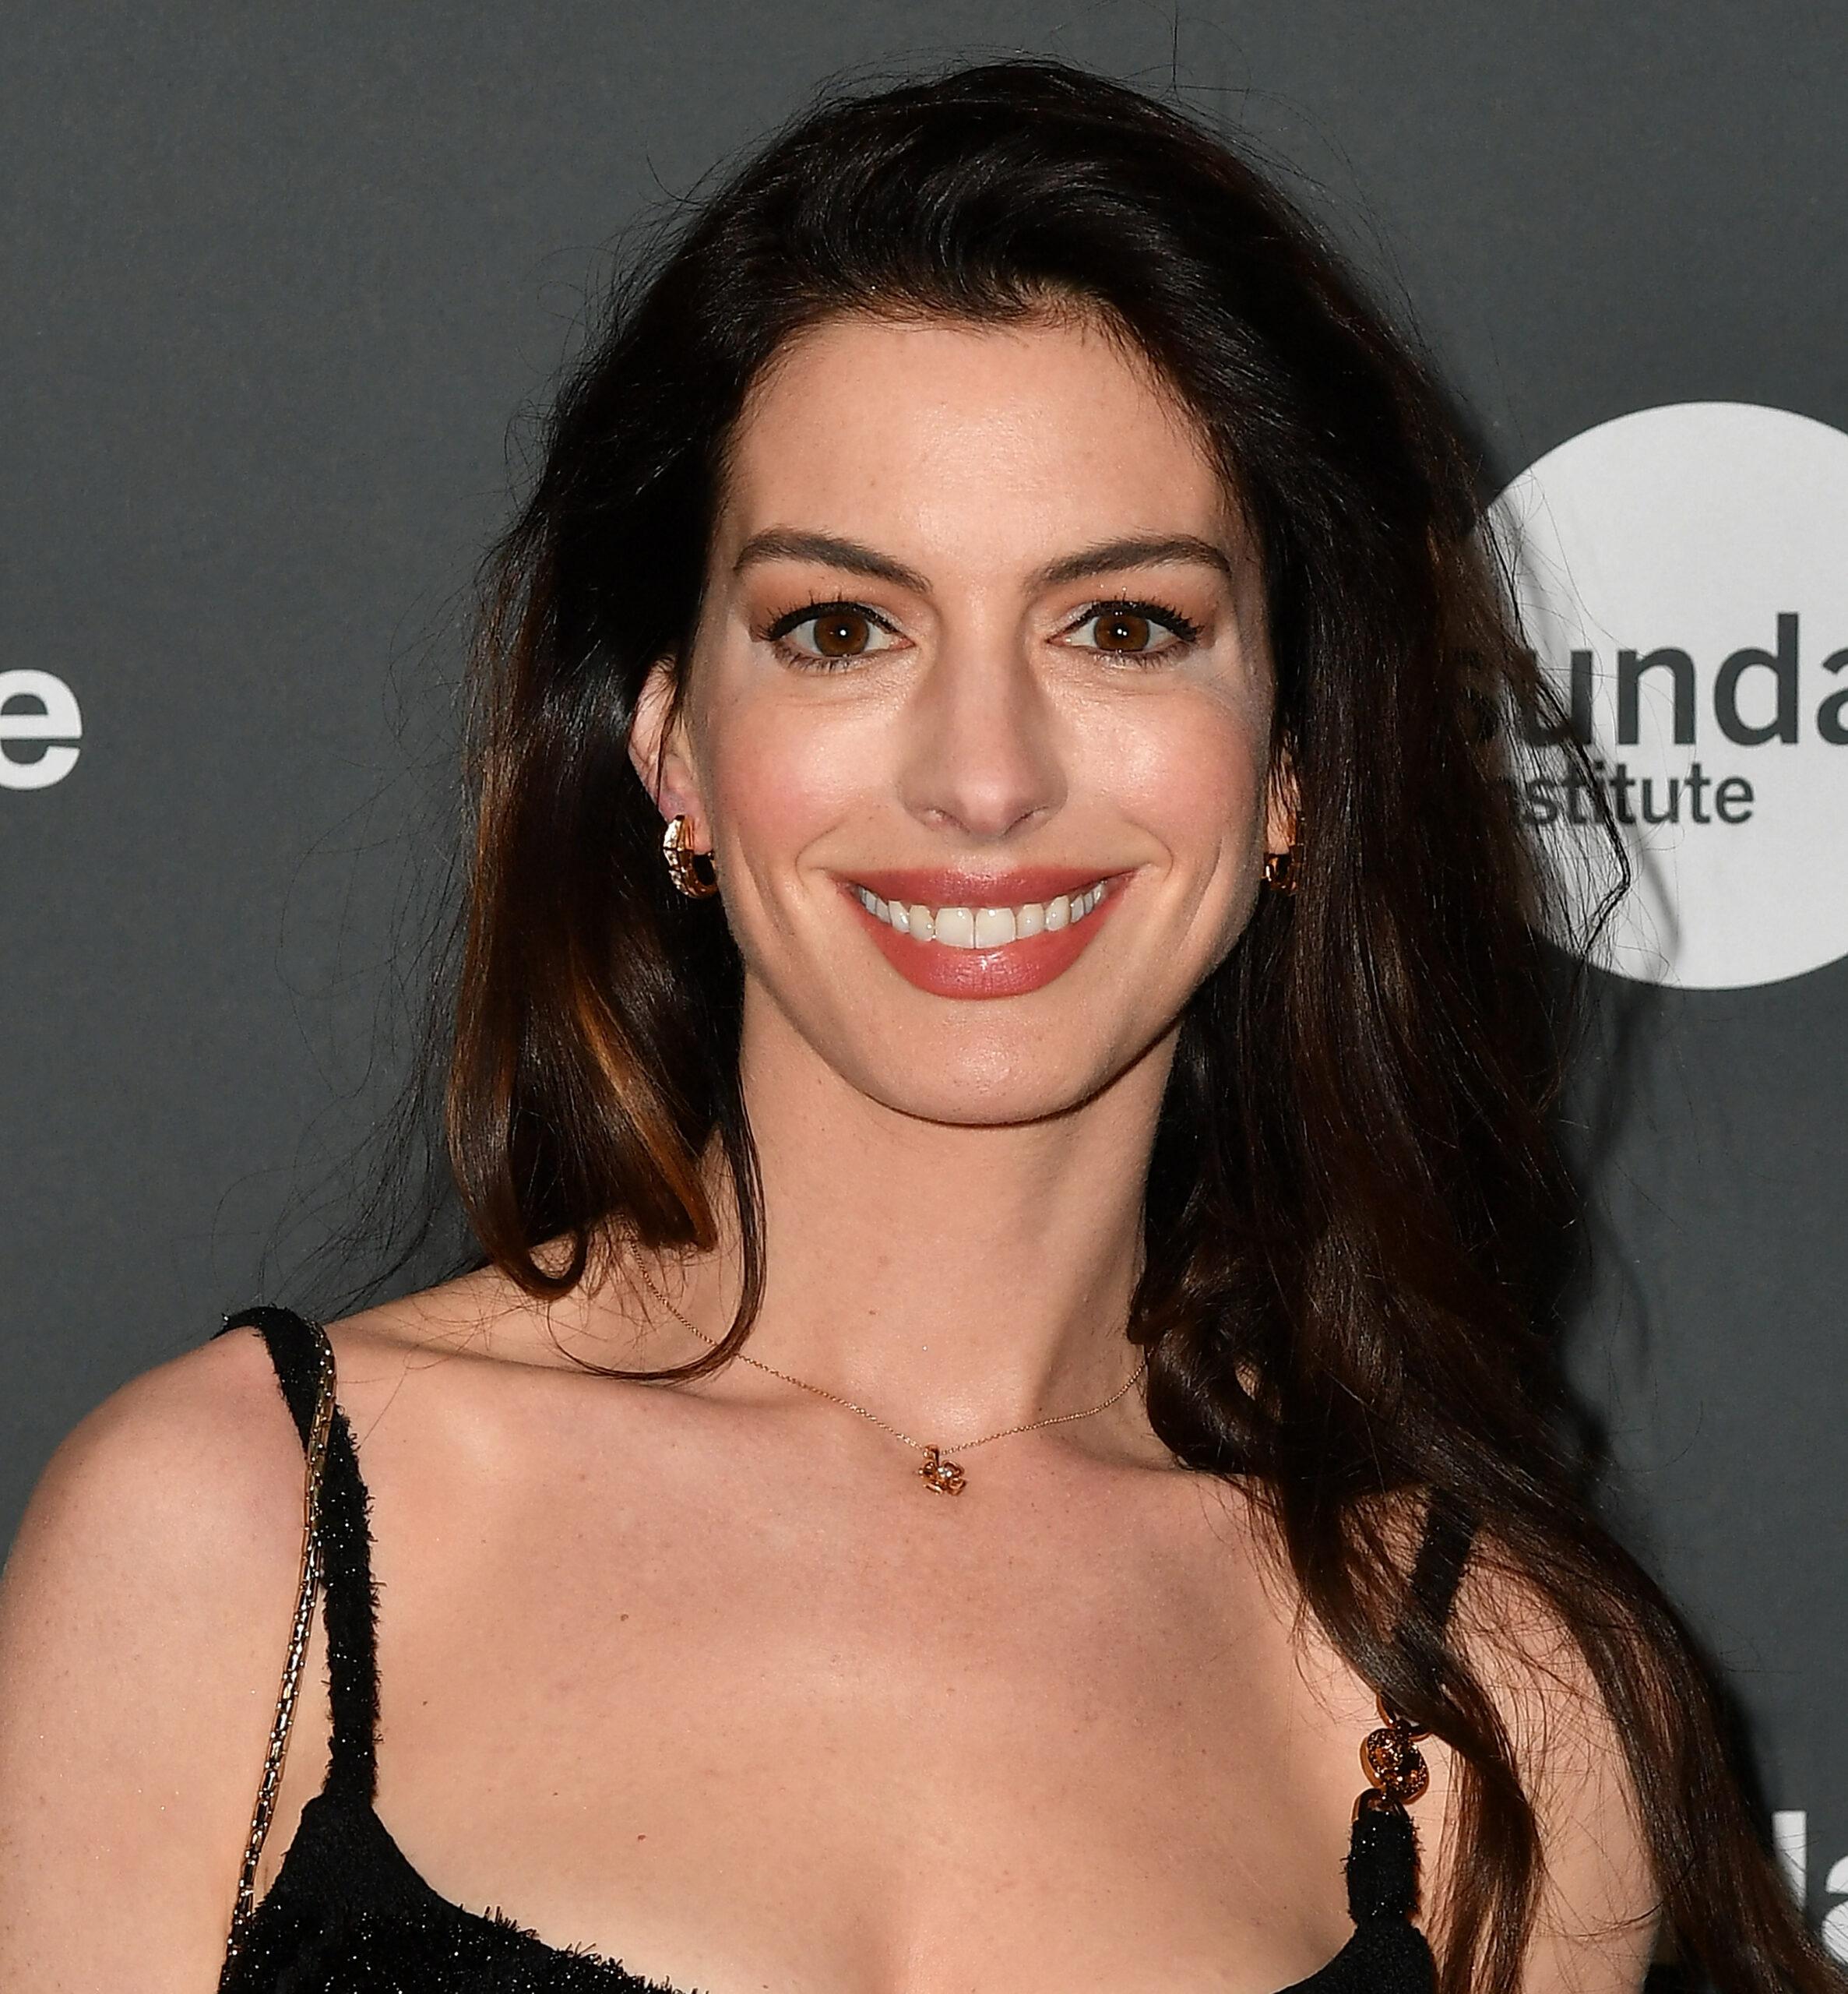 On Wednesdays, Anne Hathaway 'Wears No Pants': See The Steamy Photo!